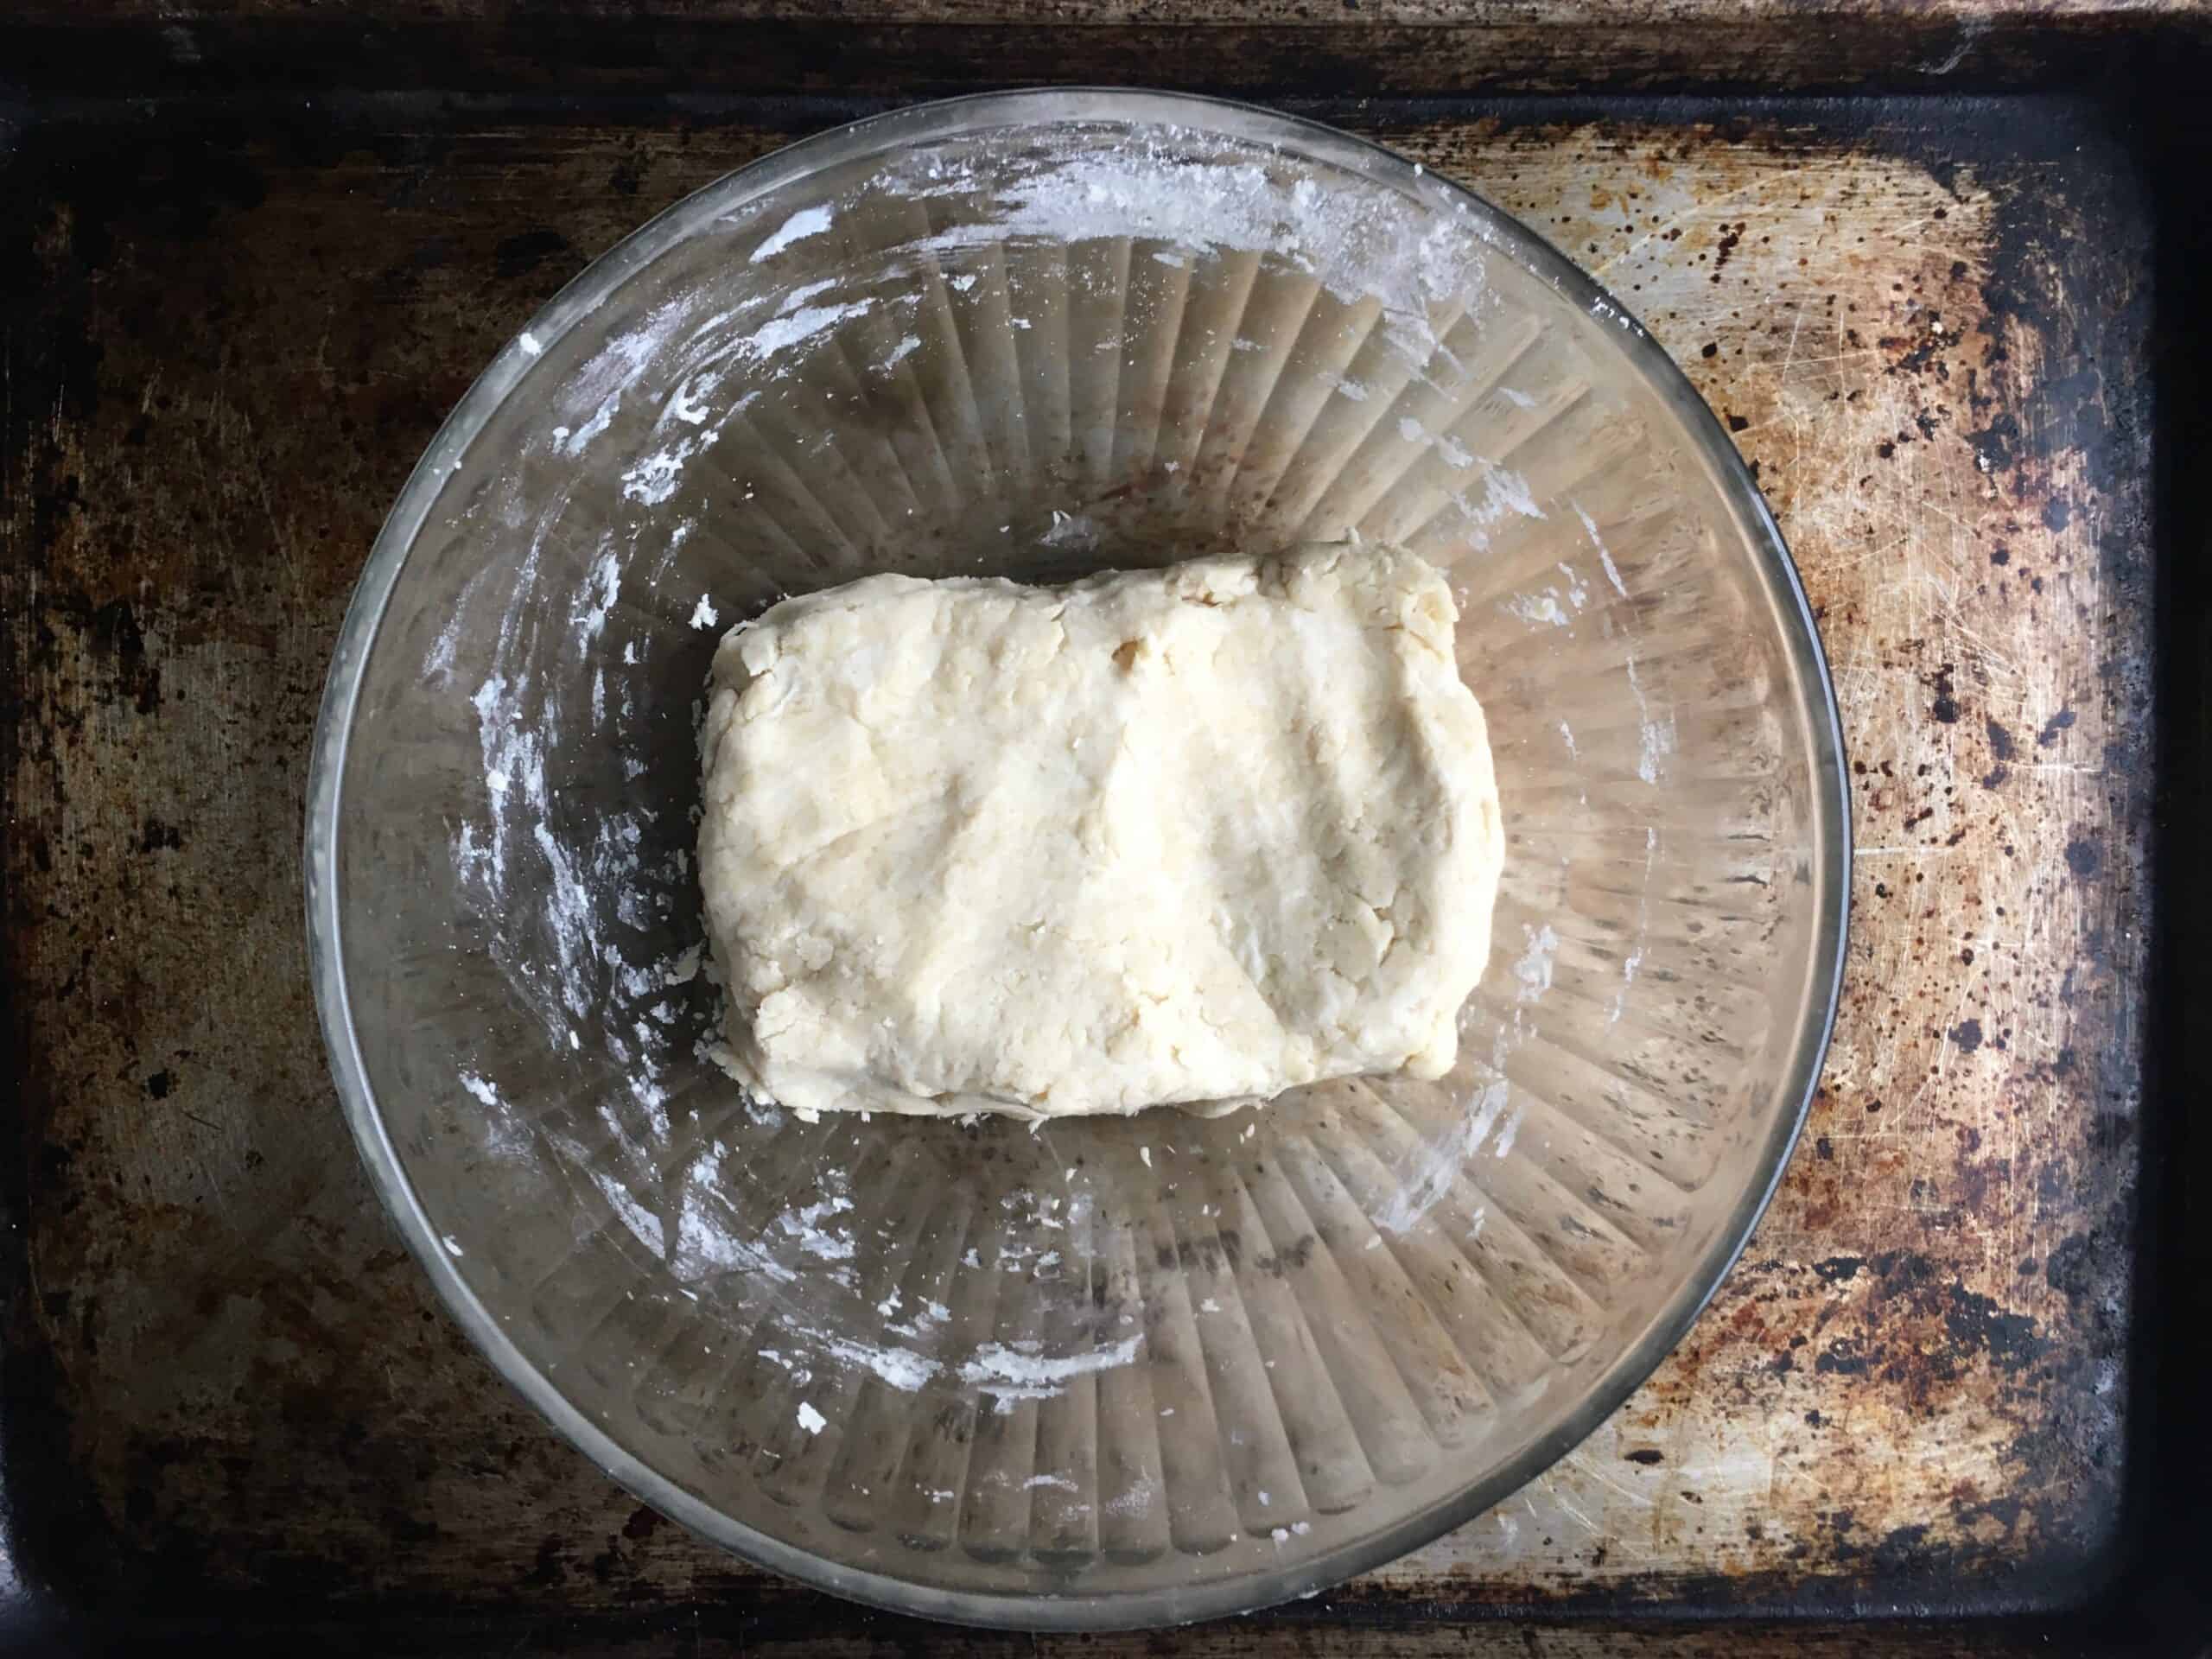 dough brick inside a glass pyrex bowl resting on top of a well-seasoned sheet tray